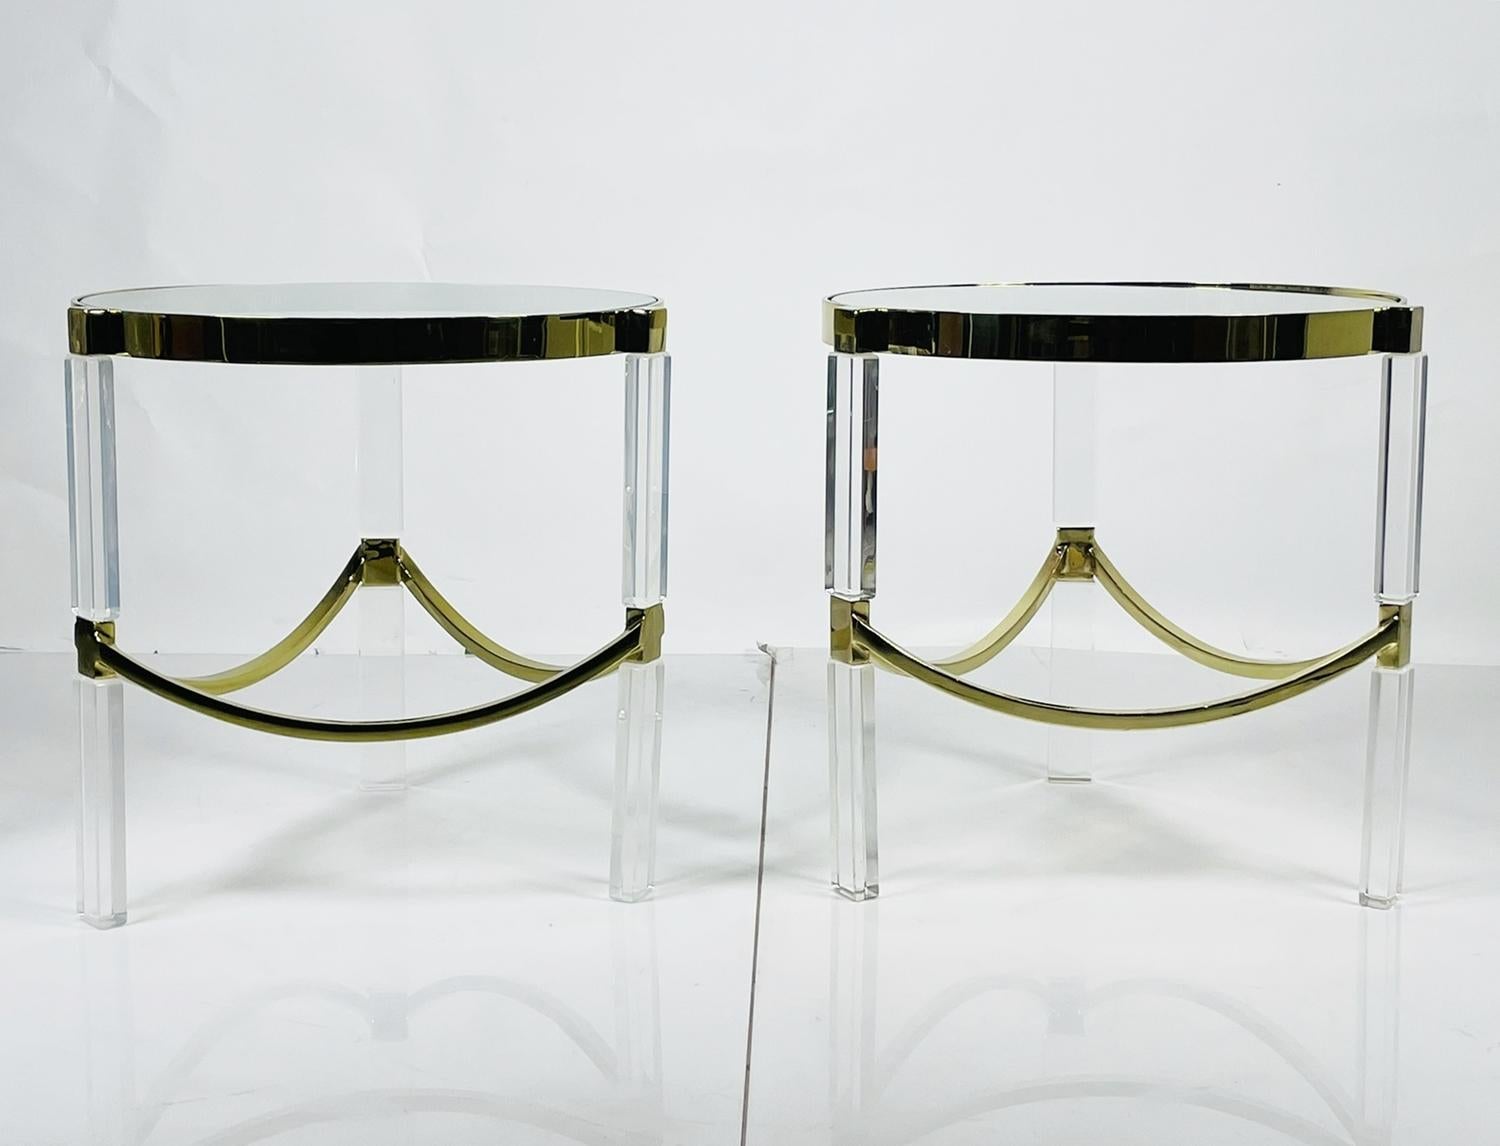 CHJ 2010, Classic Wolf Side Tables.

Beatiful pair of side tables designed and manufactured by Charles Hollis Jones in the 1970's and part of the Classic collection.

Measurements:
20.50 diameter including the legs x 19.75 inches in diameter (circle